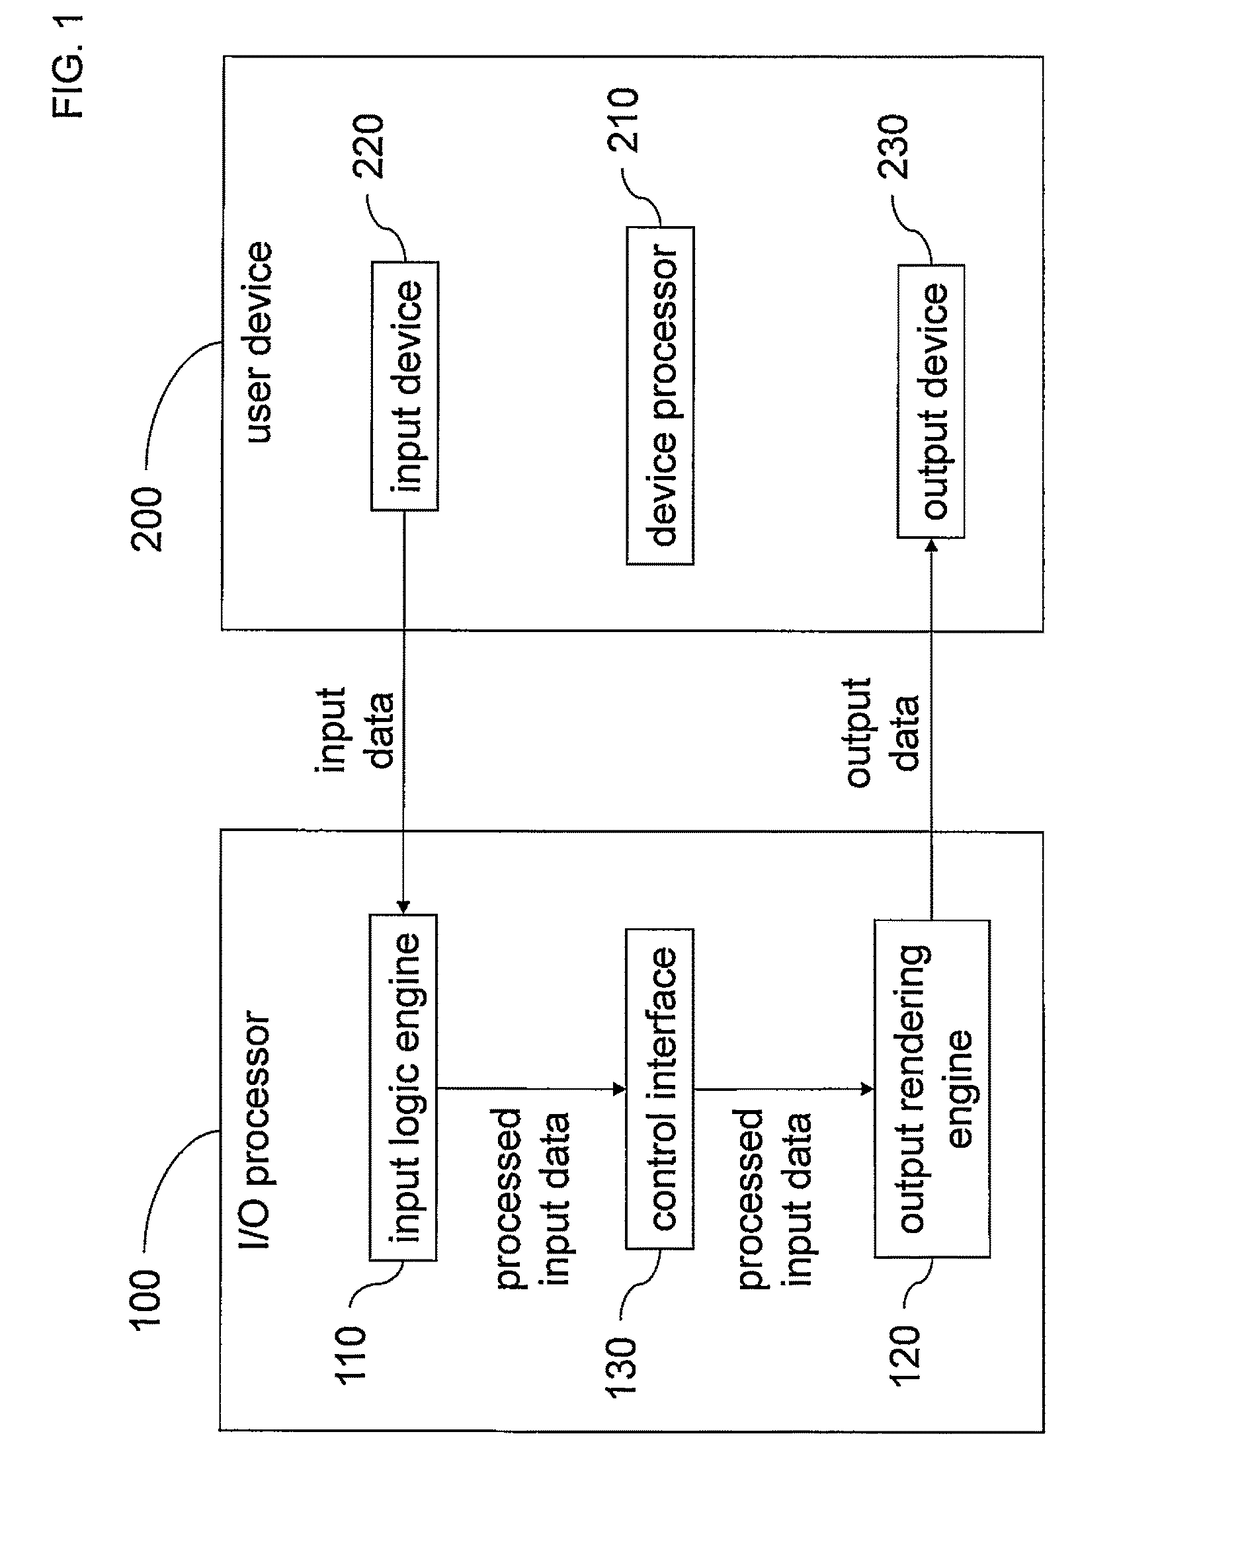 Integrated input control and output display system